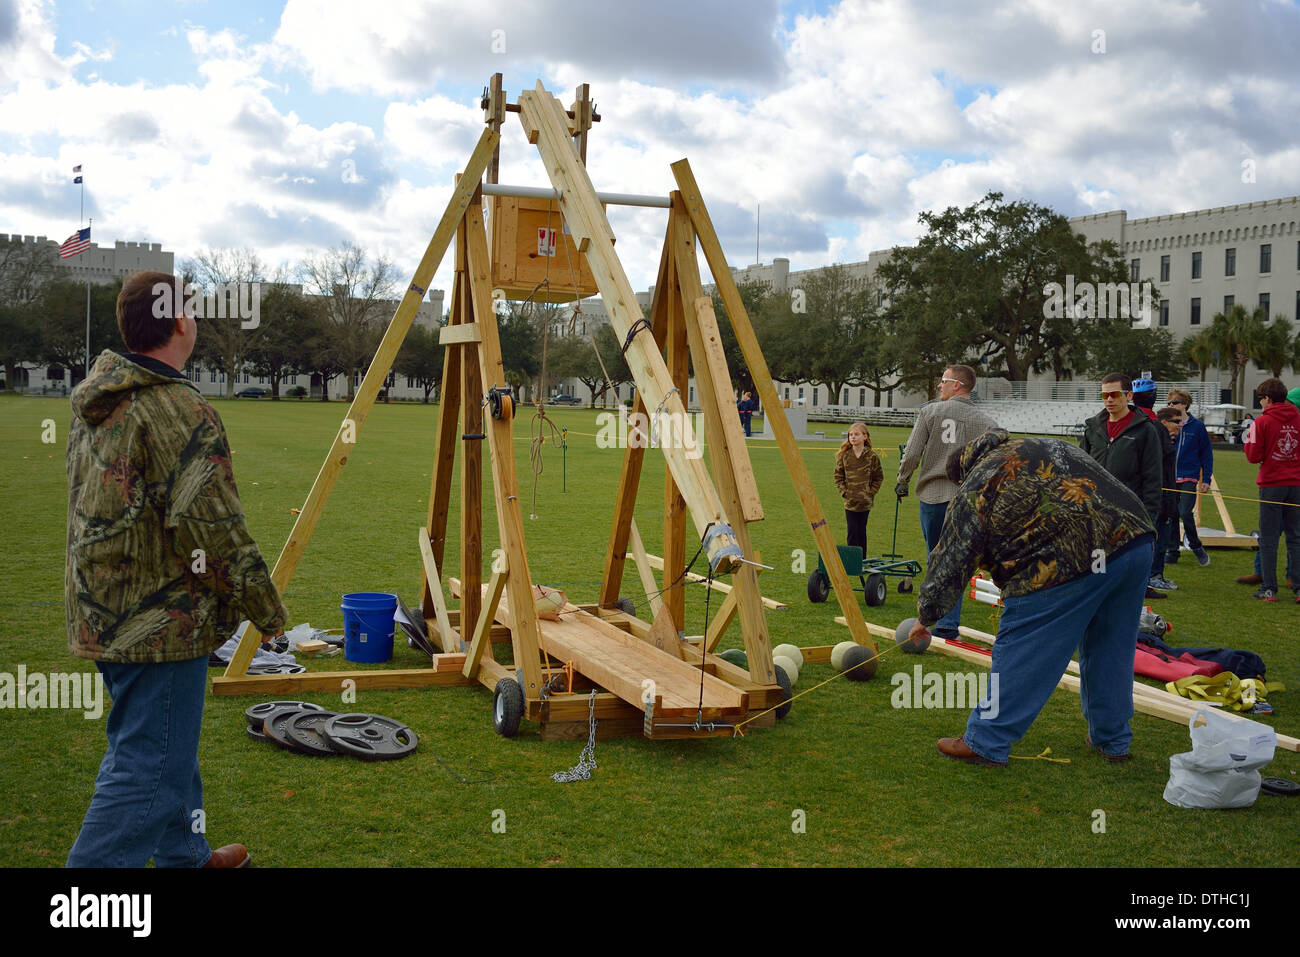 Loading projectile onto catapult Stock Photo